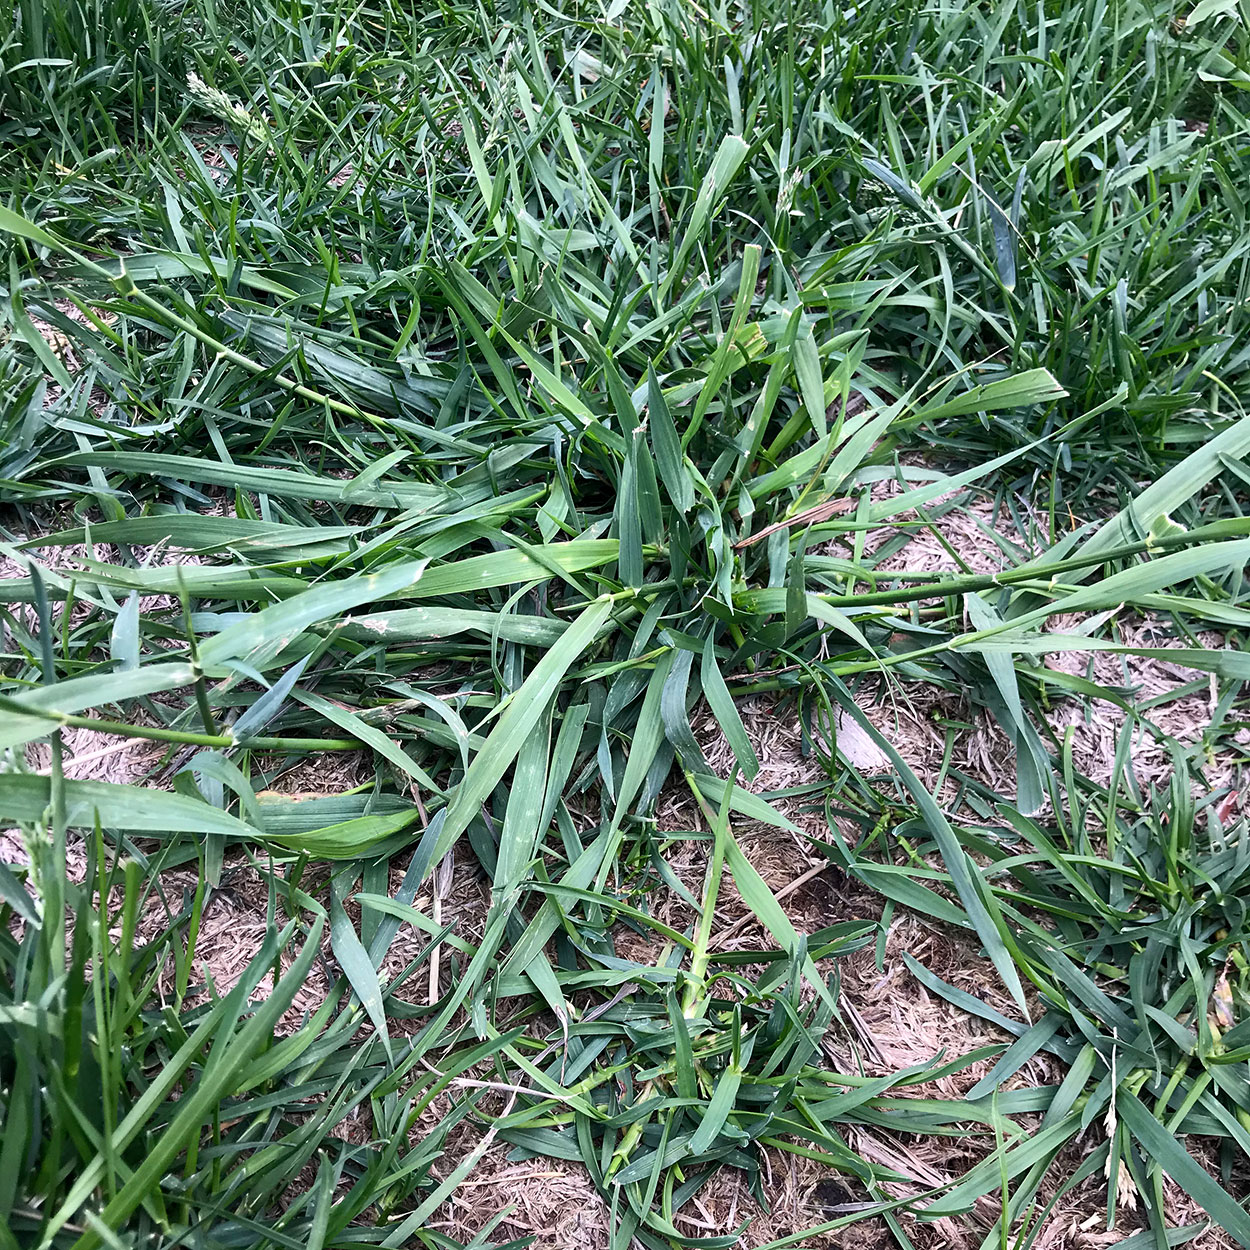 Large patch of grab grass growing on lawn.